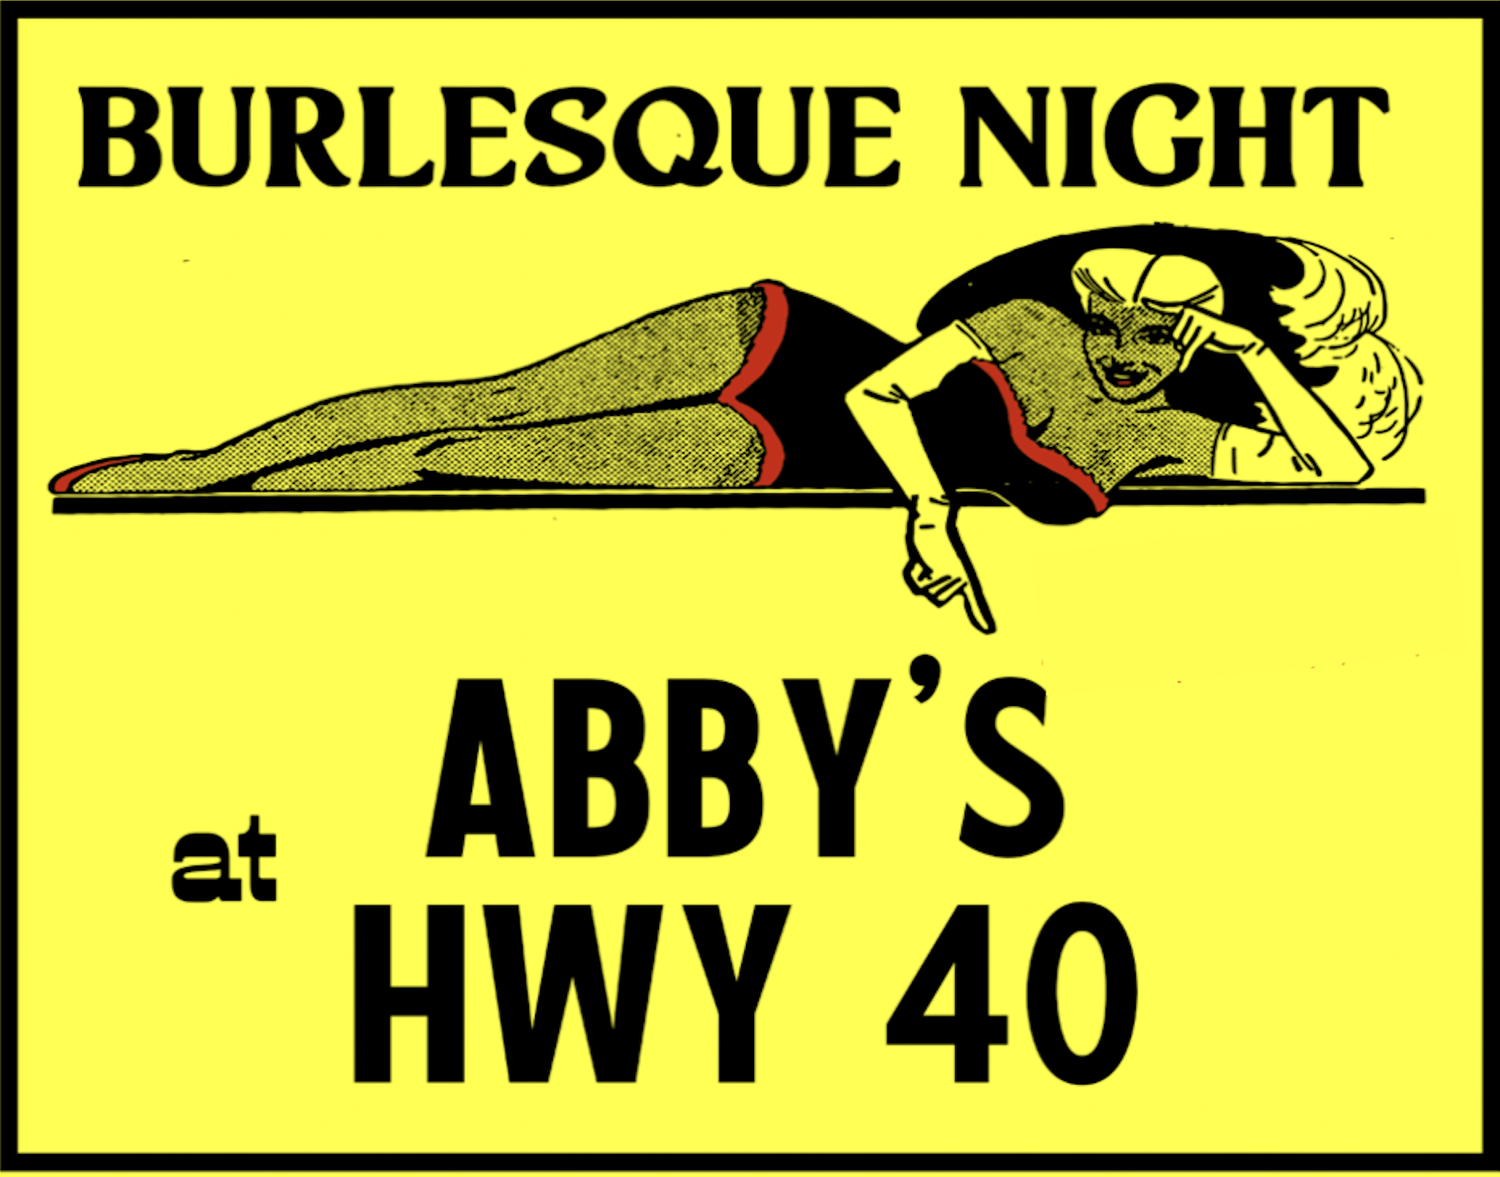 Burlesque Night at Abby's Highway 40